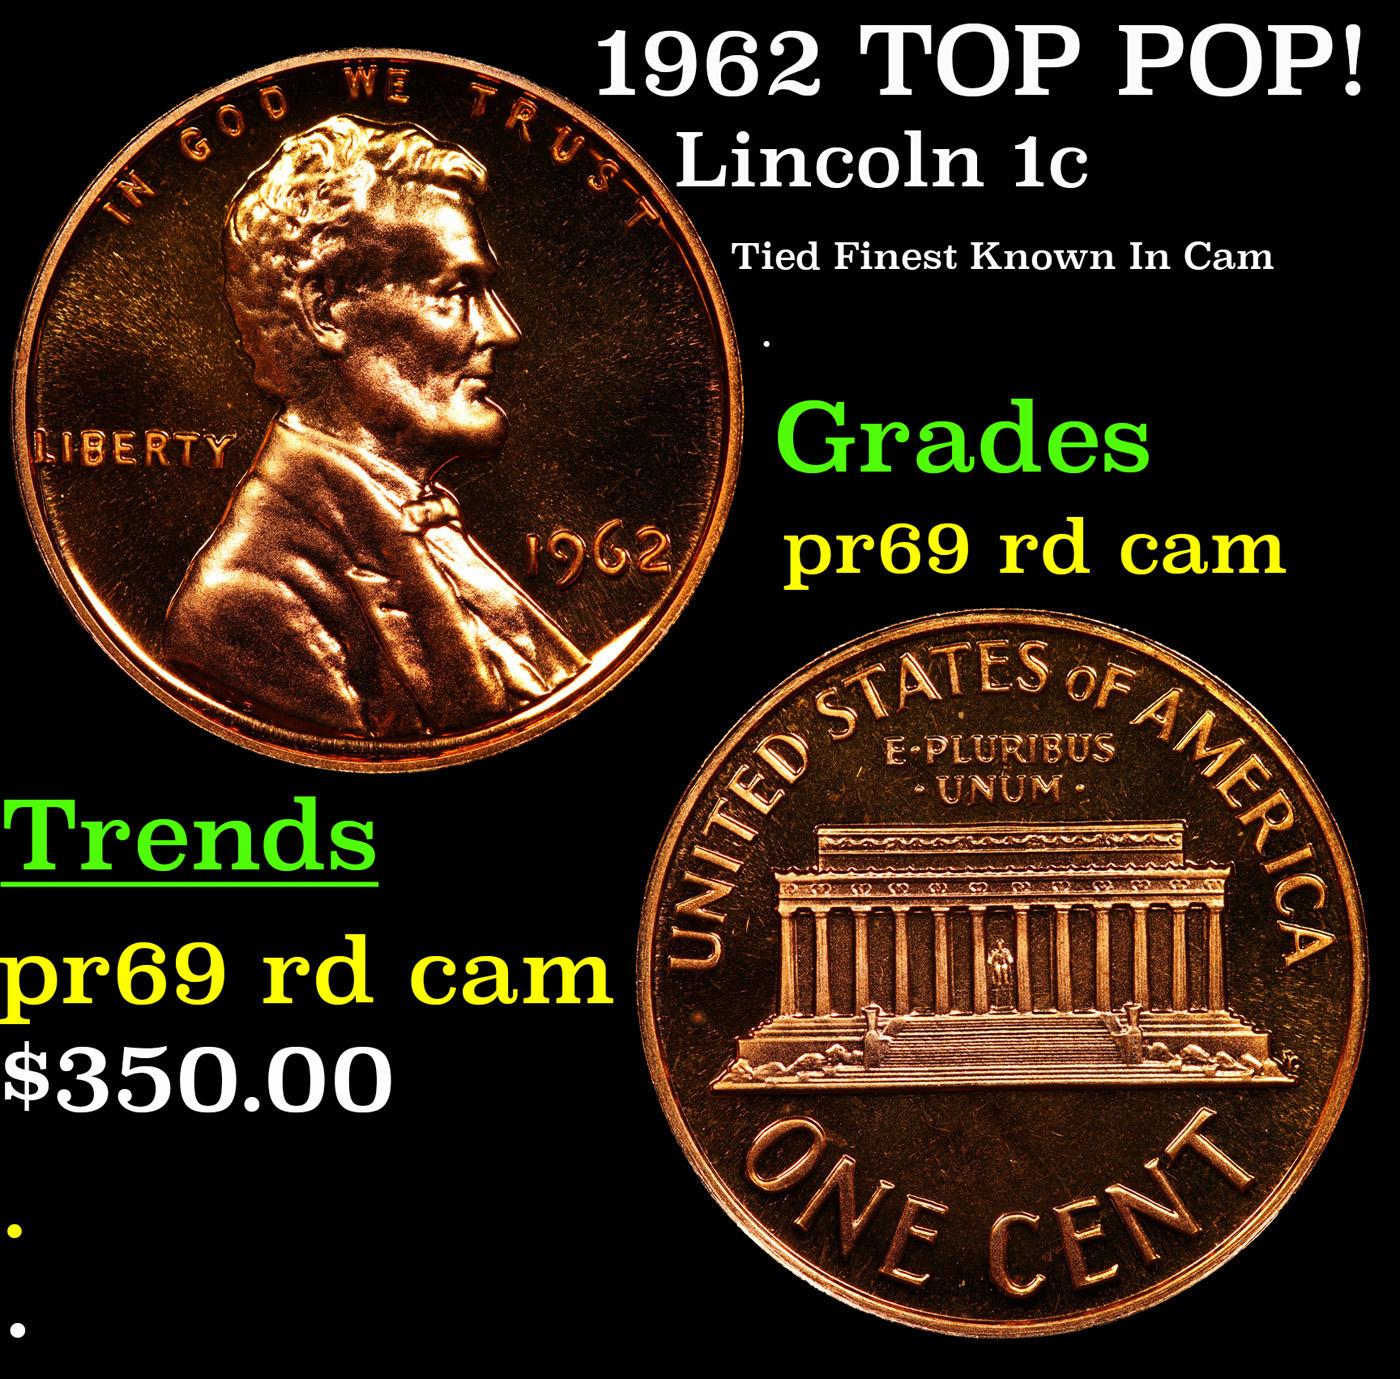 Proof 1962 Lincoln Cent TOP POP! 1c Graded pr69 rd cam BY SEGS